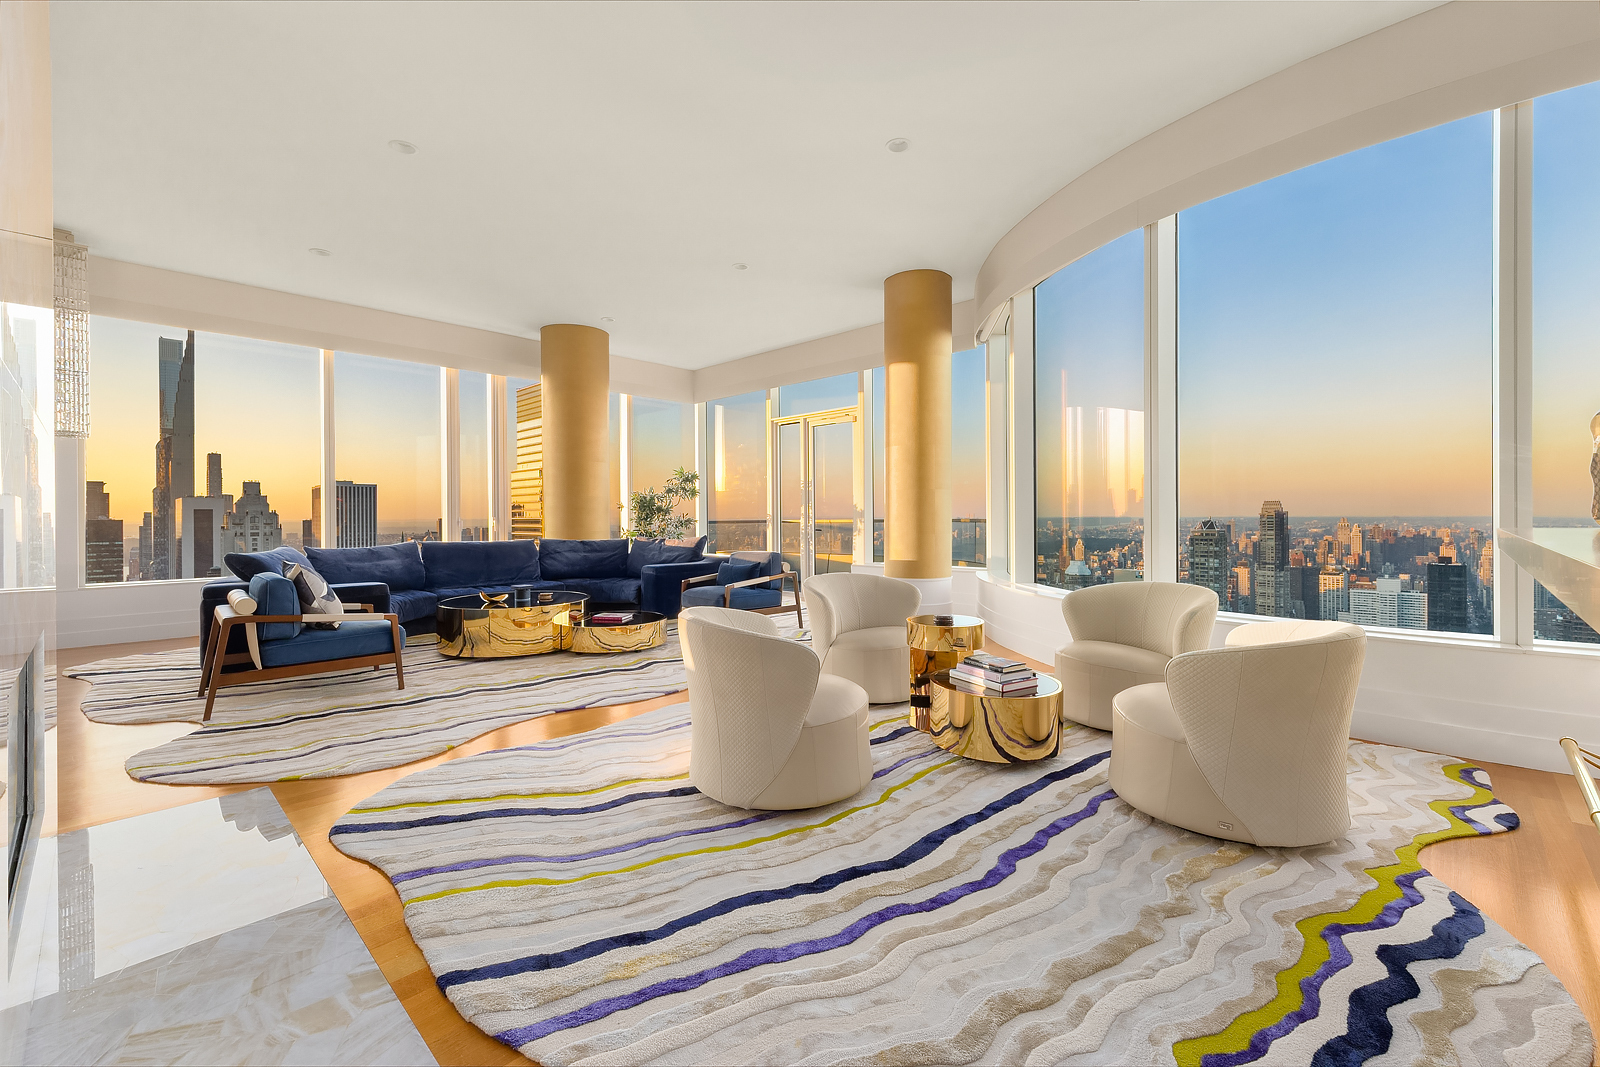 252 East 57th Street 62A, Sutton, Midtown East, NYC - 5 Bedrooms  
7 Bathrooms  
8 Rooms - 